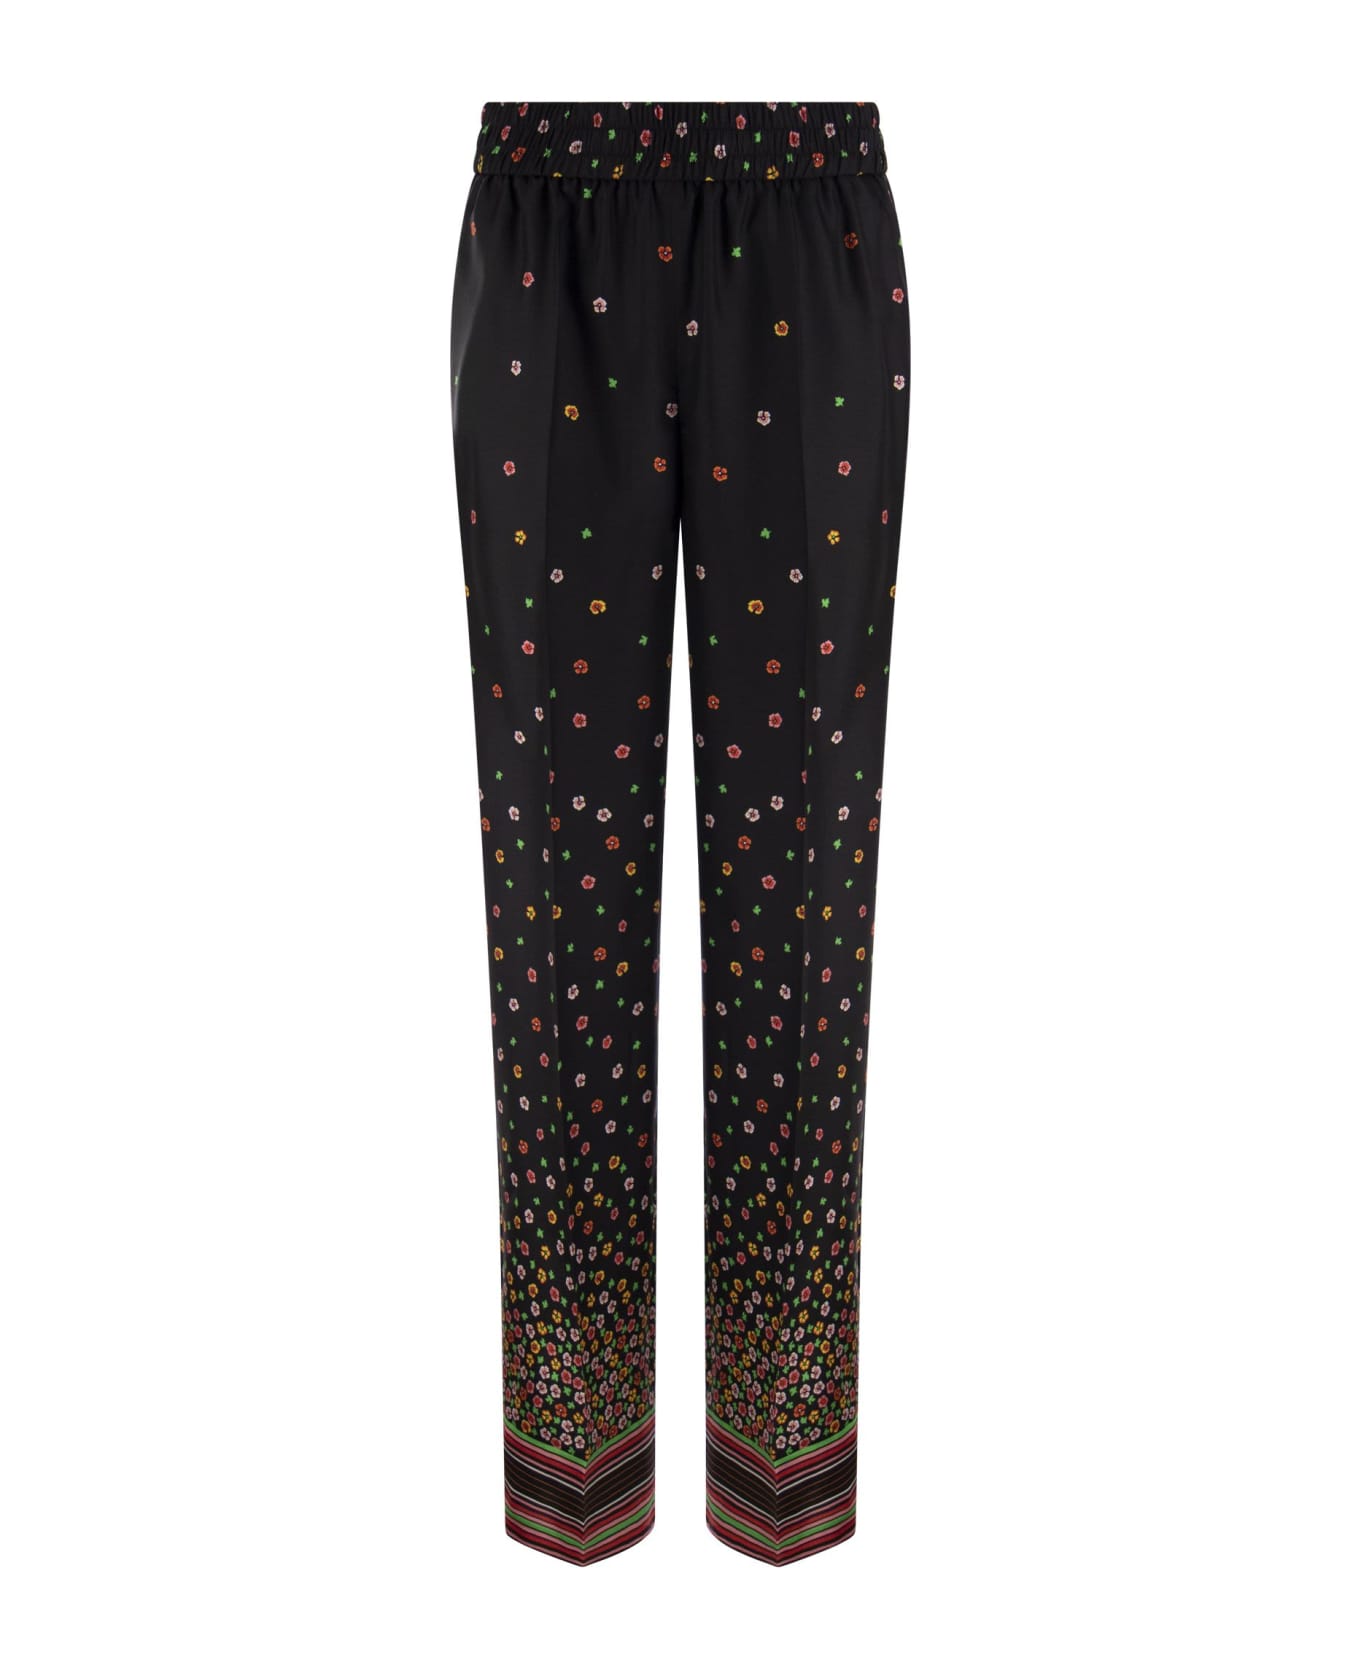 RED Valentino Floral Print Silk Trousers - Black ボトムス